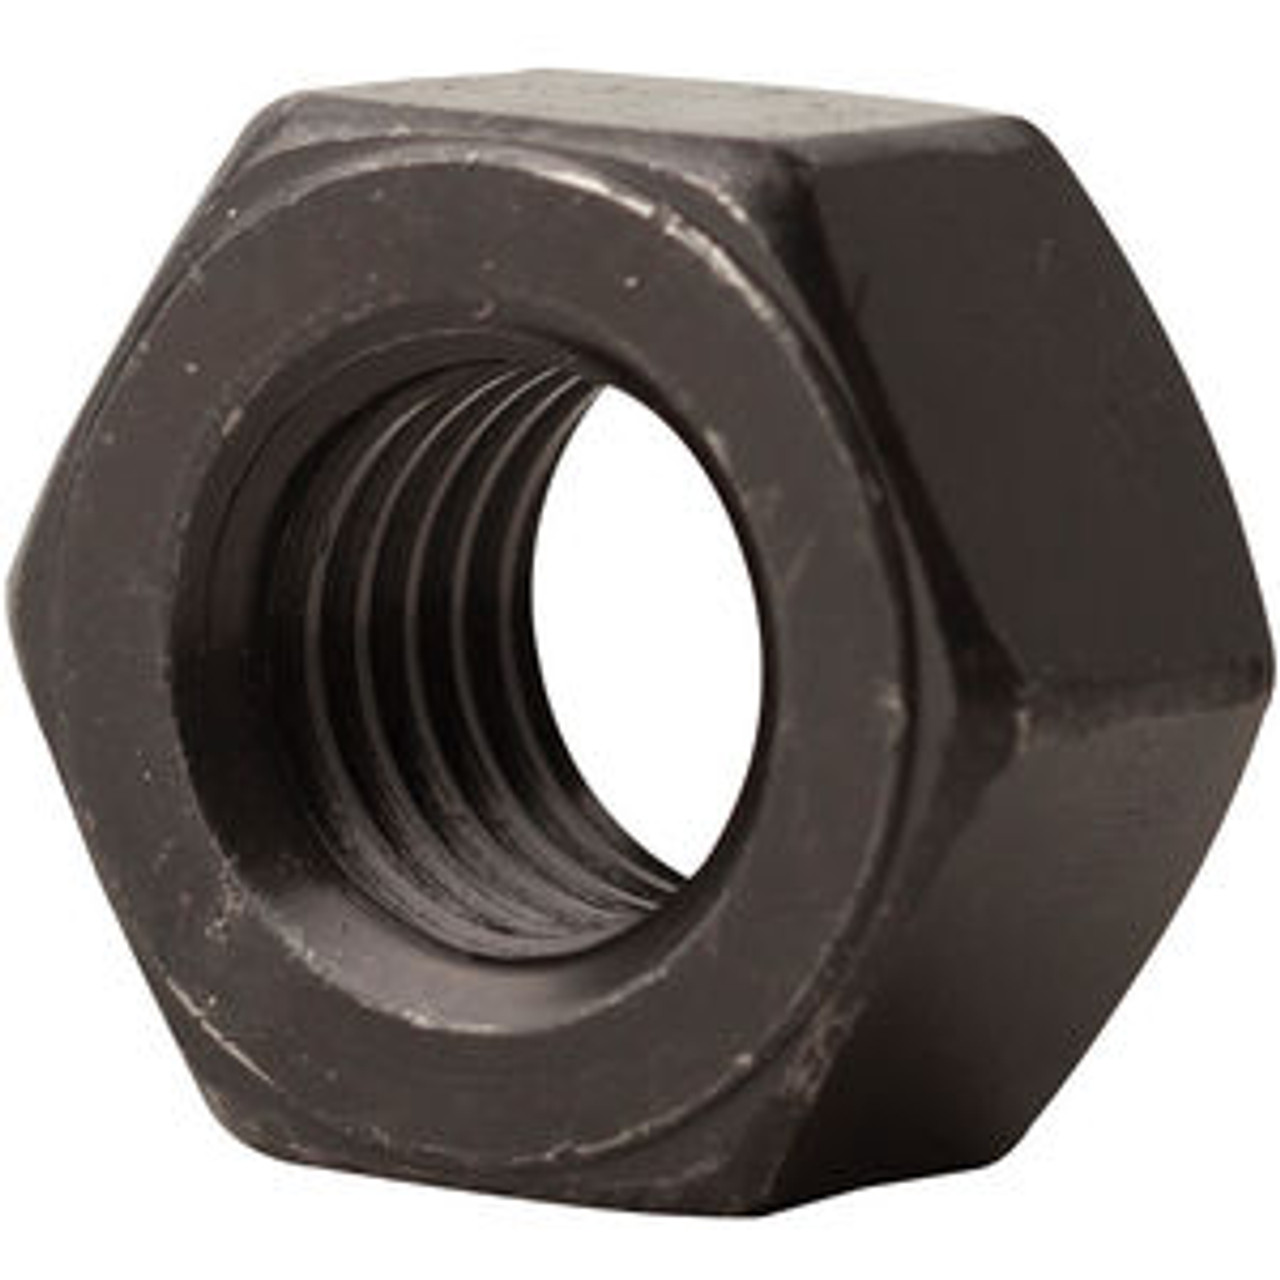 ASTM A563 Grade A Heavy Hex Nuts